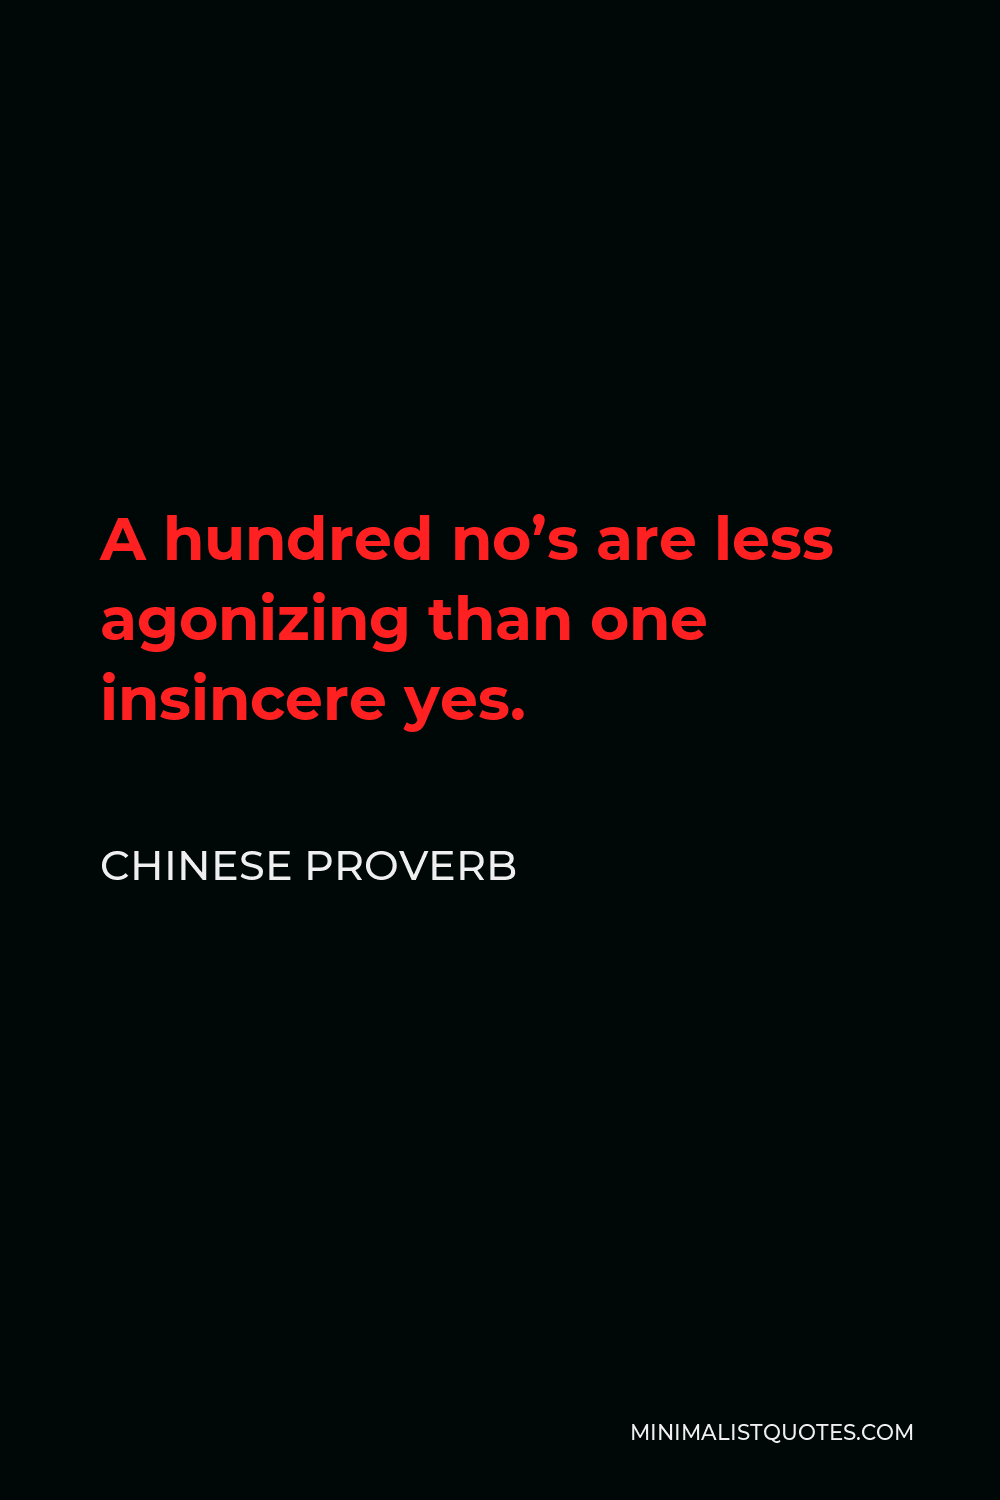 Chinese Proverb Quote - A hundred no’s are less agonizing than one insincere yes.